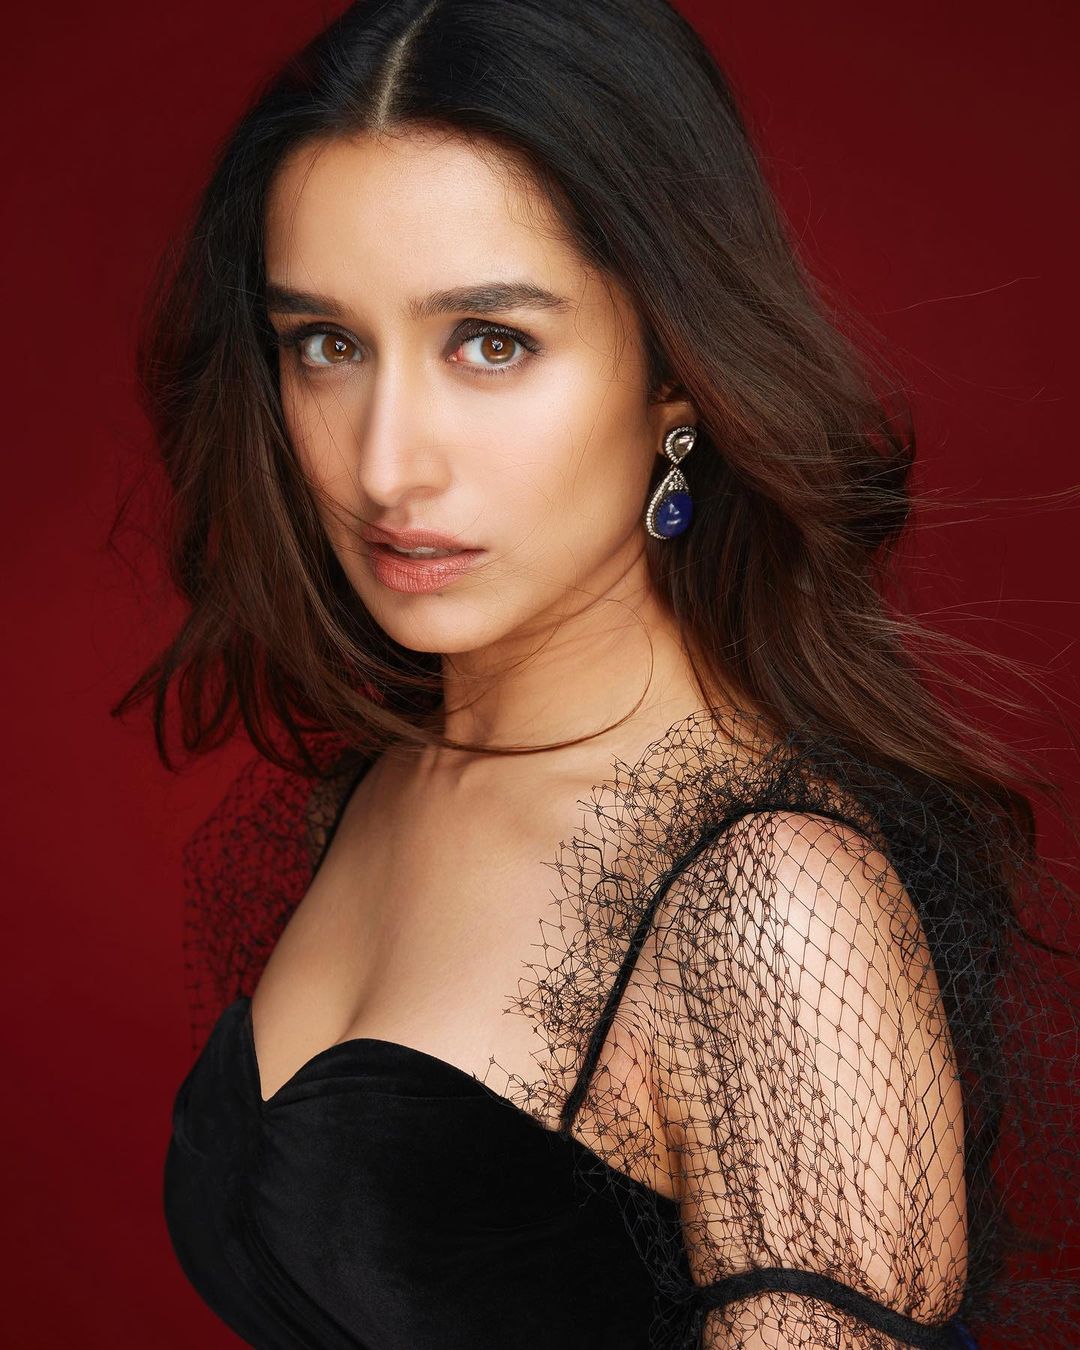 Shraddha Kapoor oozes hotness in a black strappy outfit.